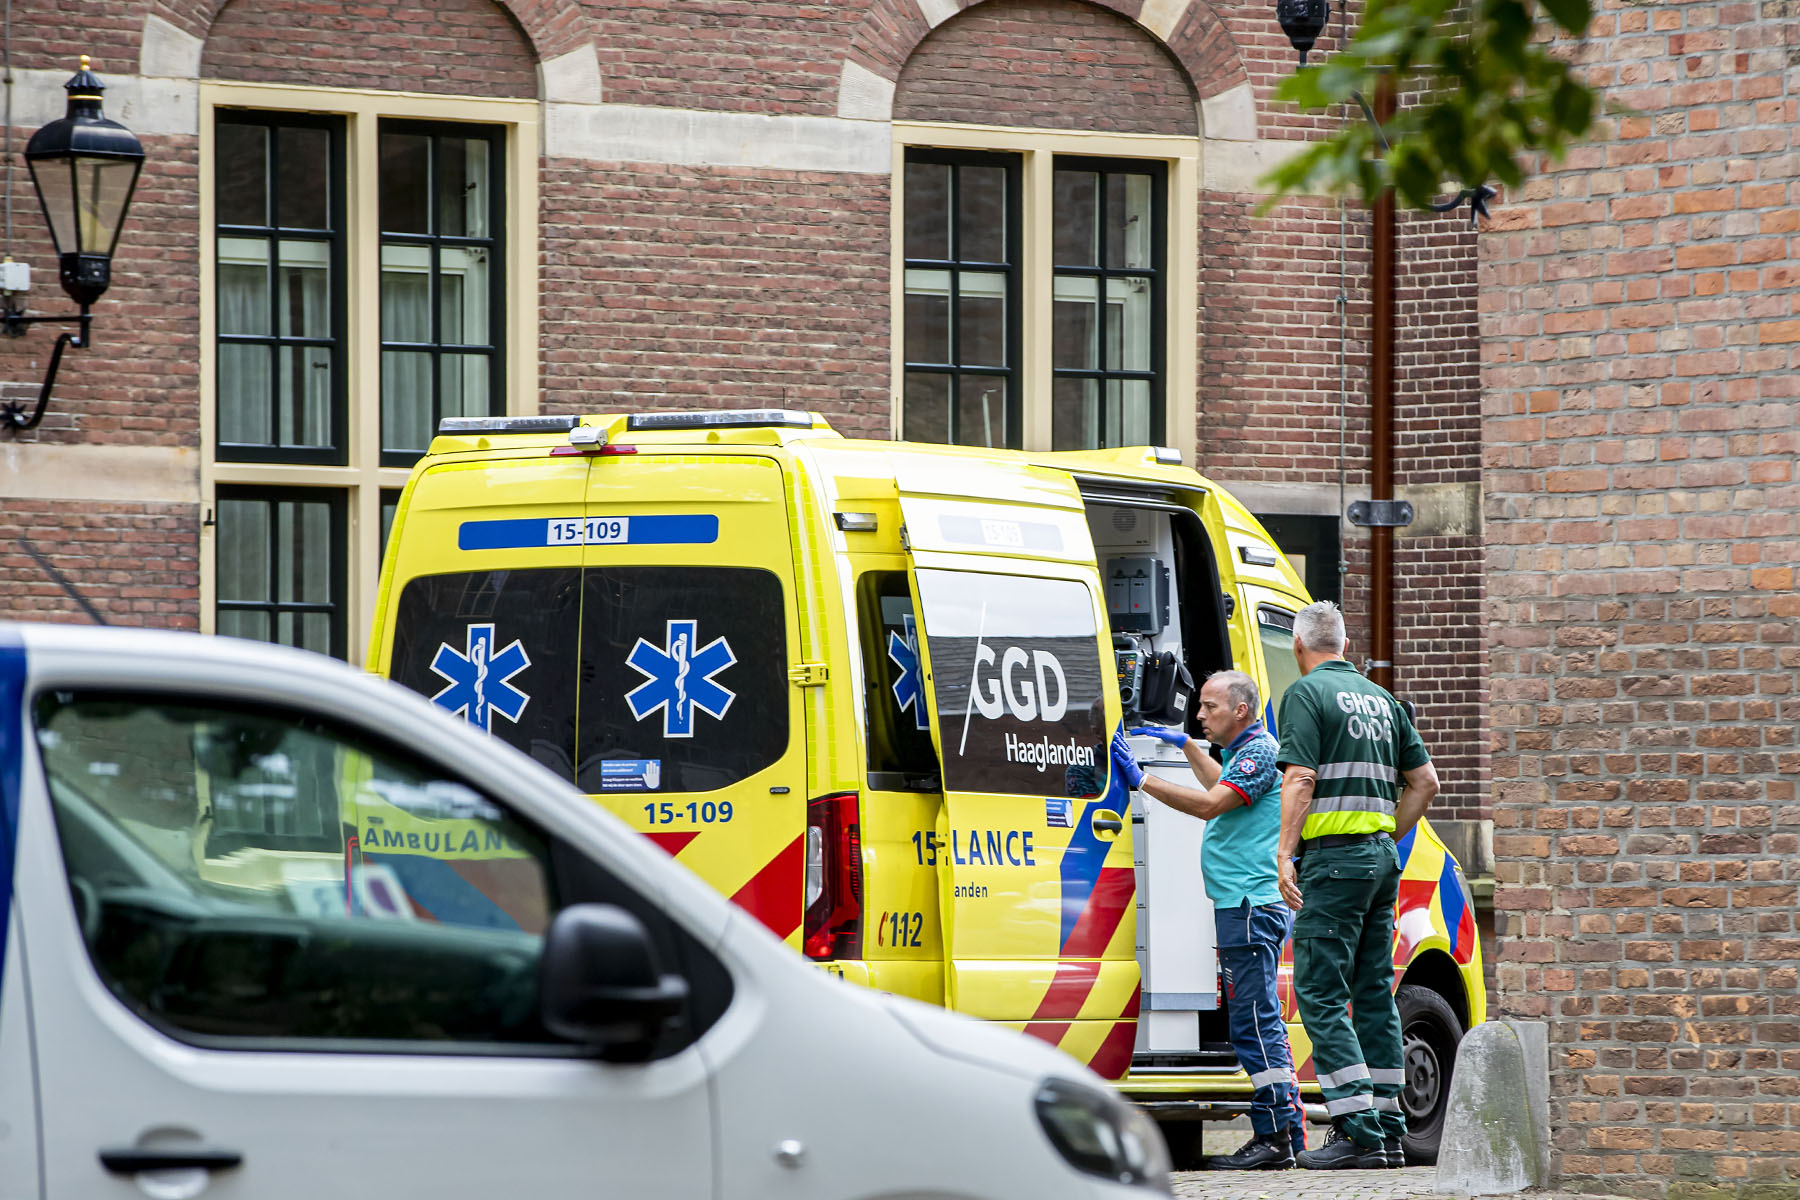 Two ambulance workers standing by an ambulance in The Hague, the Netherlands.